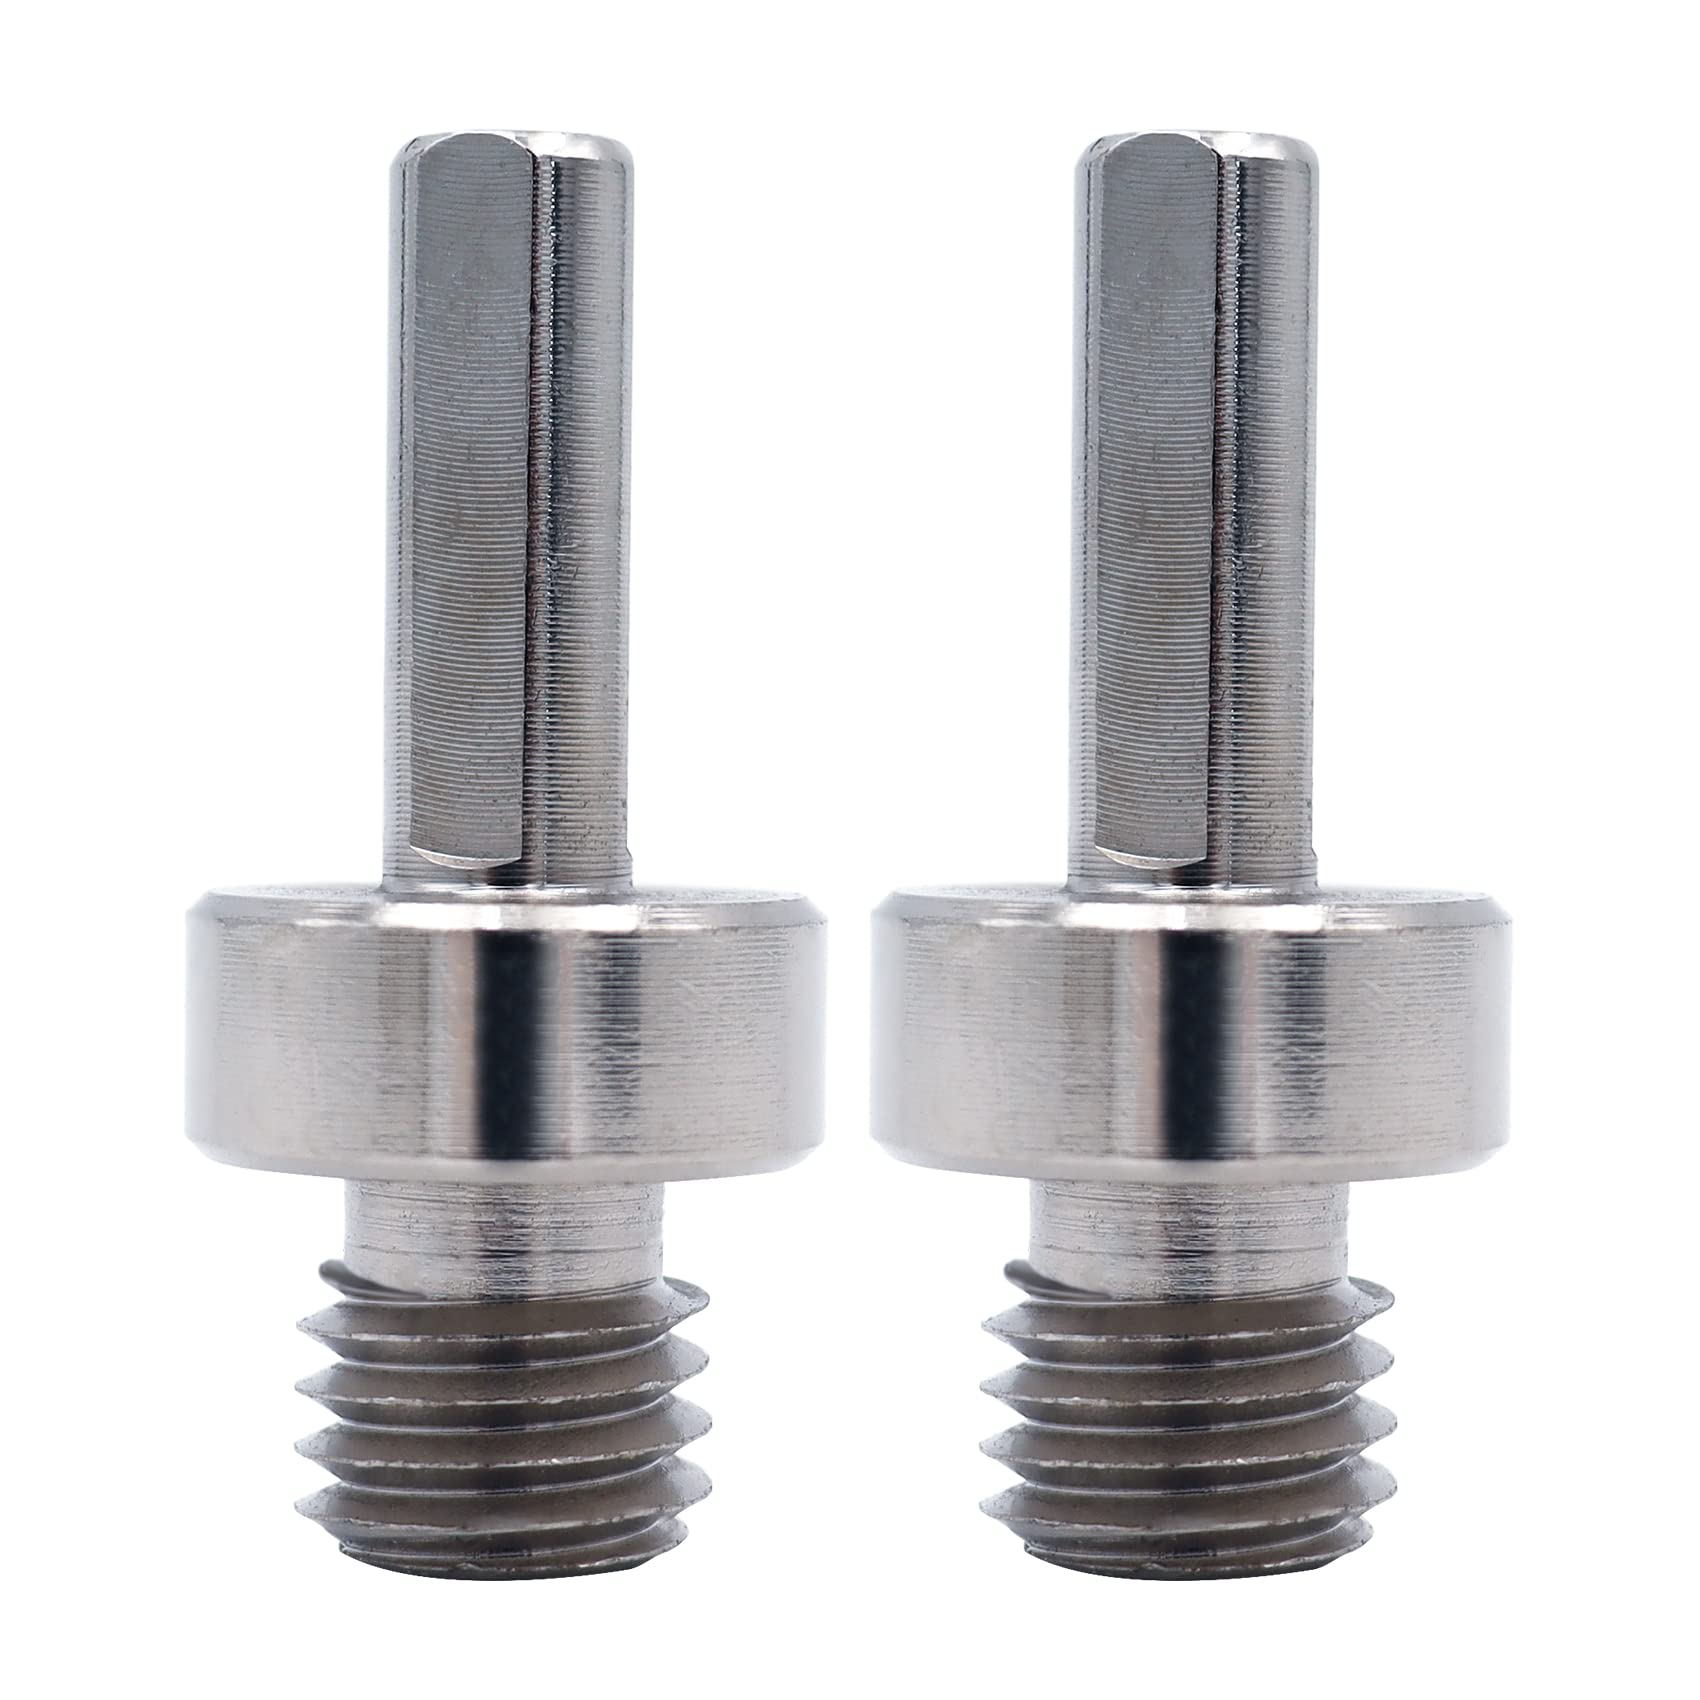 Highdril Adapter For Core Drill Bit, 2Pcs 58-11 Thread To 38 Triangle Shank,Diamond Hole Saw Drill Sanding Attachment Arbor Shaf